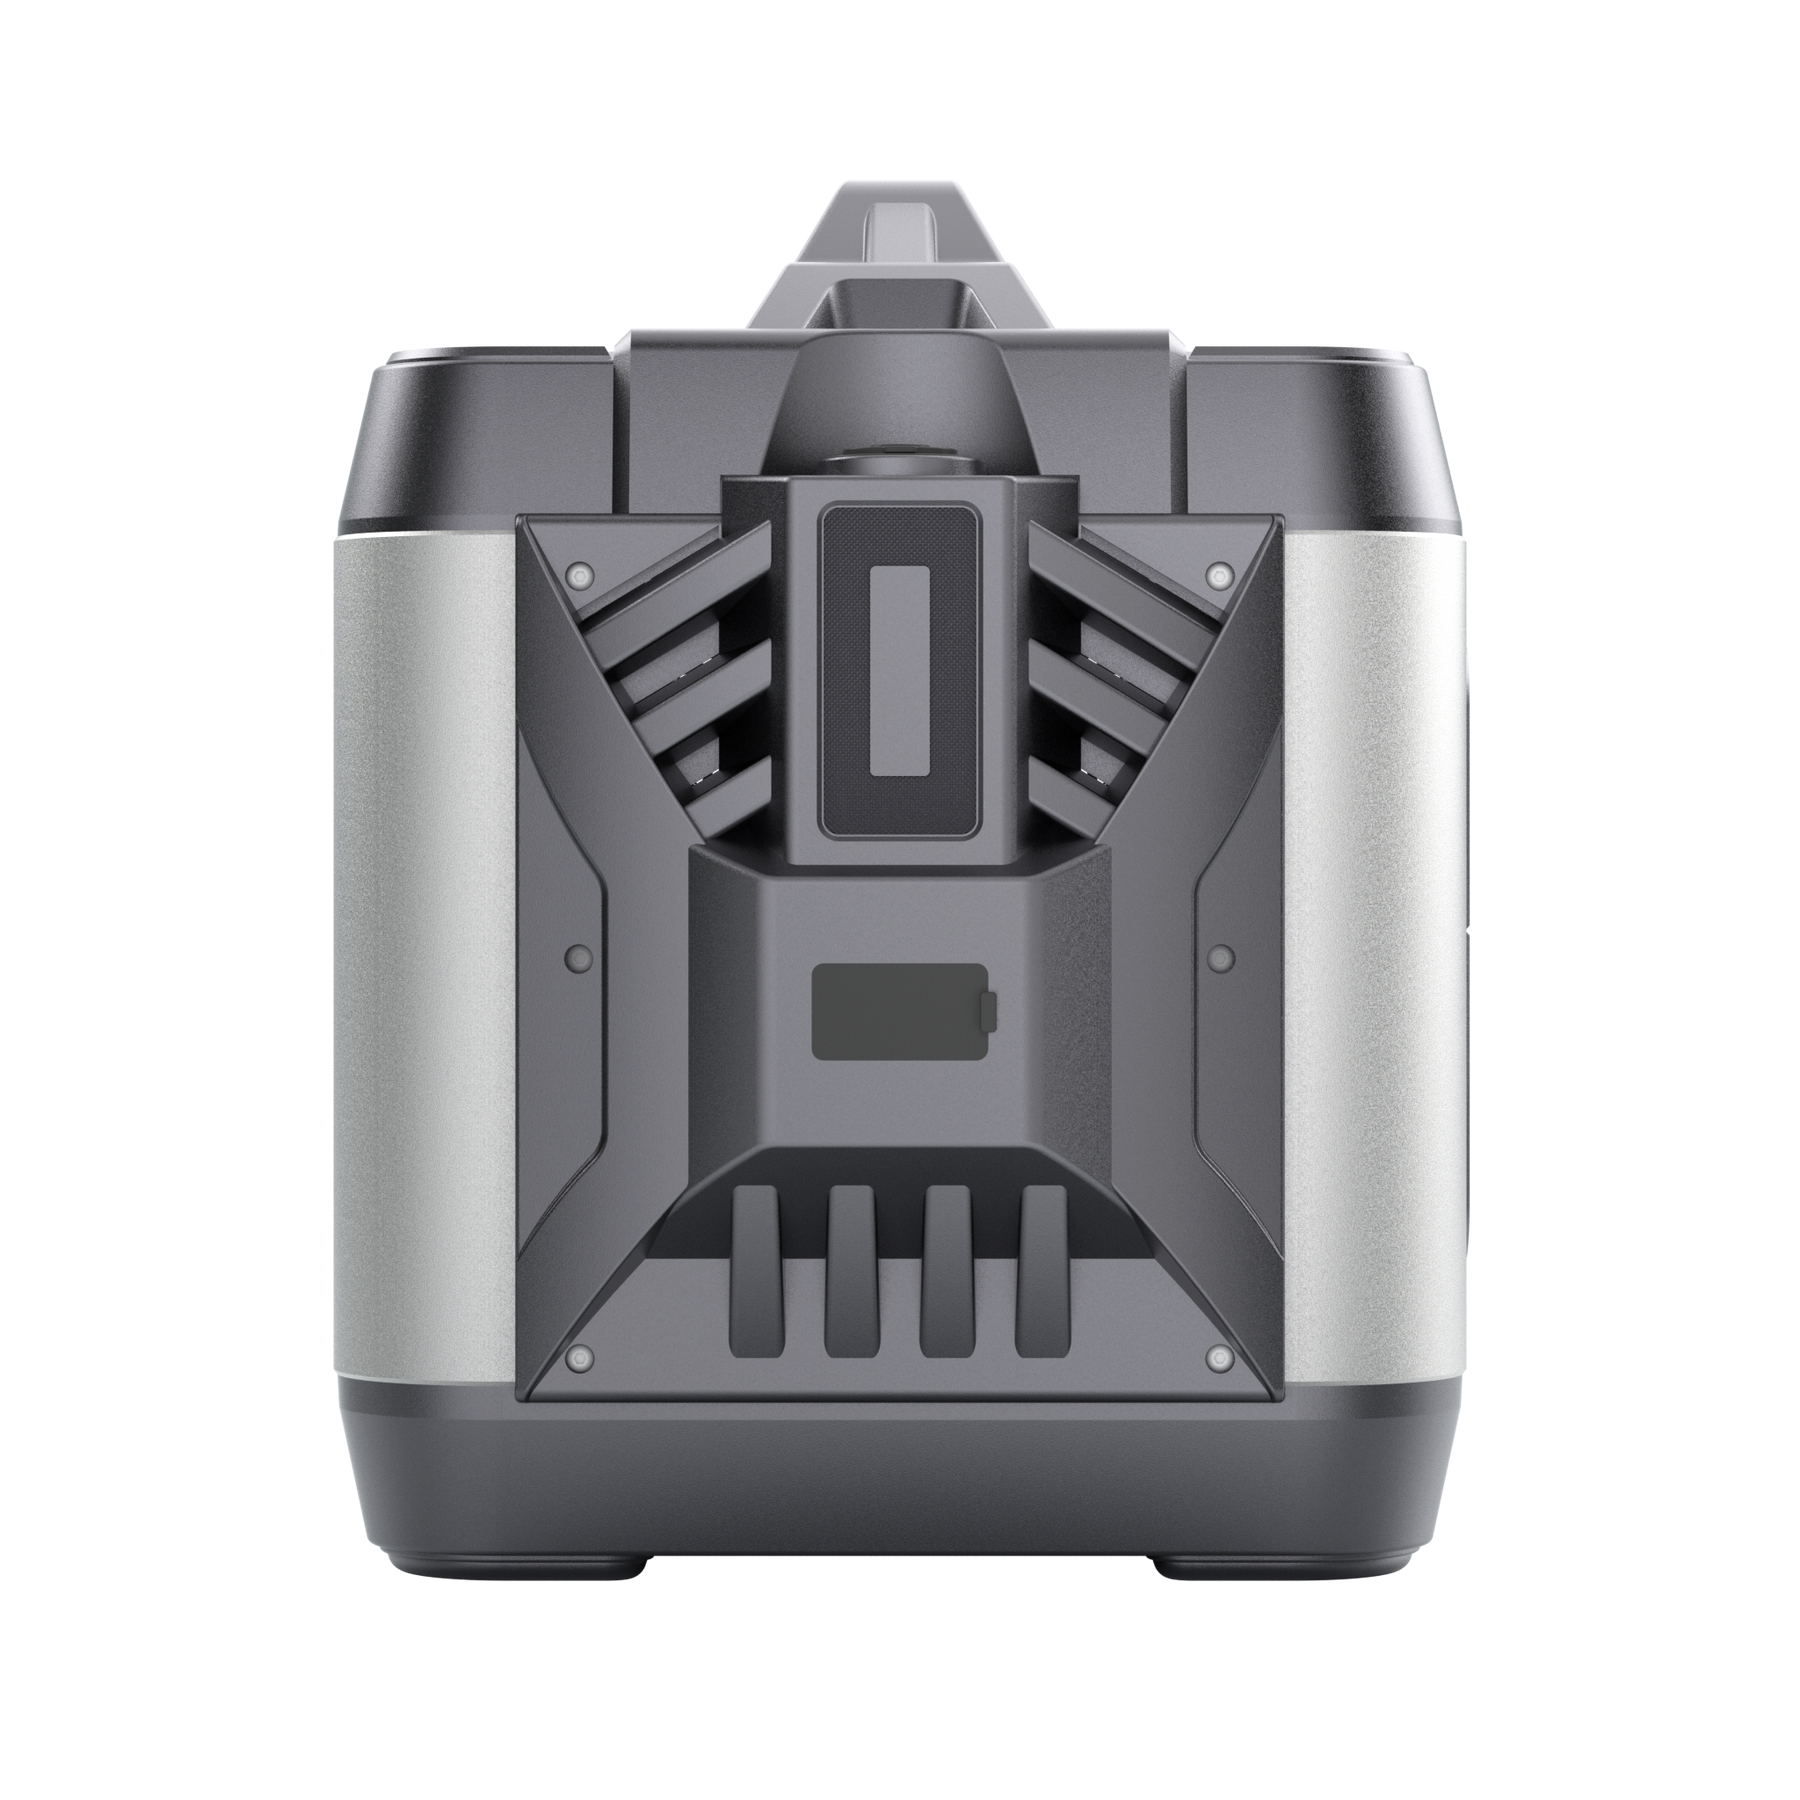 POWEREPUBLIC T3000 portable power station, 3000W 3200Wh,  metallic gray aluminum-alloy body with aircraft wing design, a car charger, an Anderson port, and a handle.